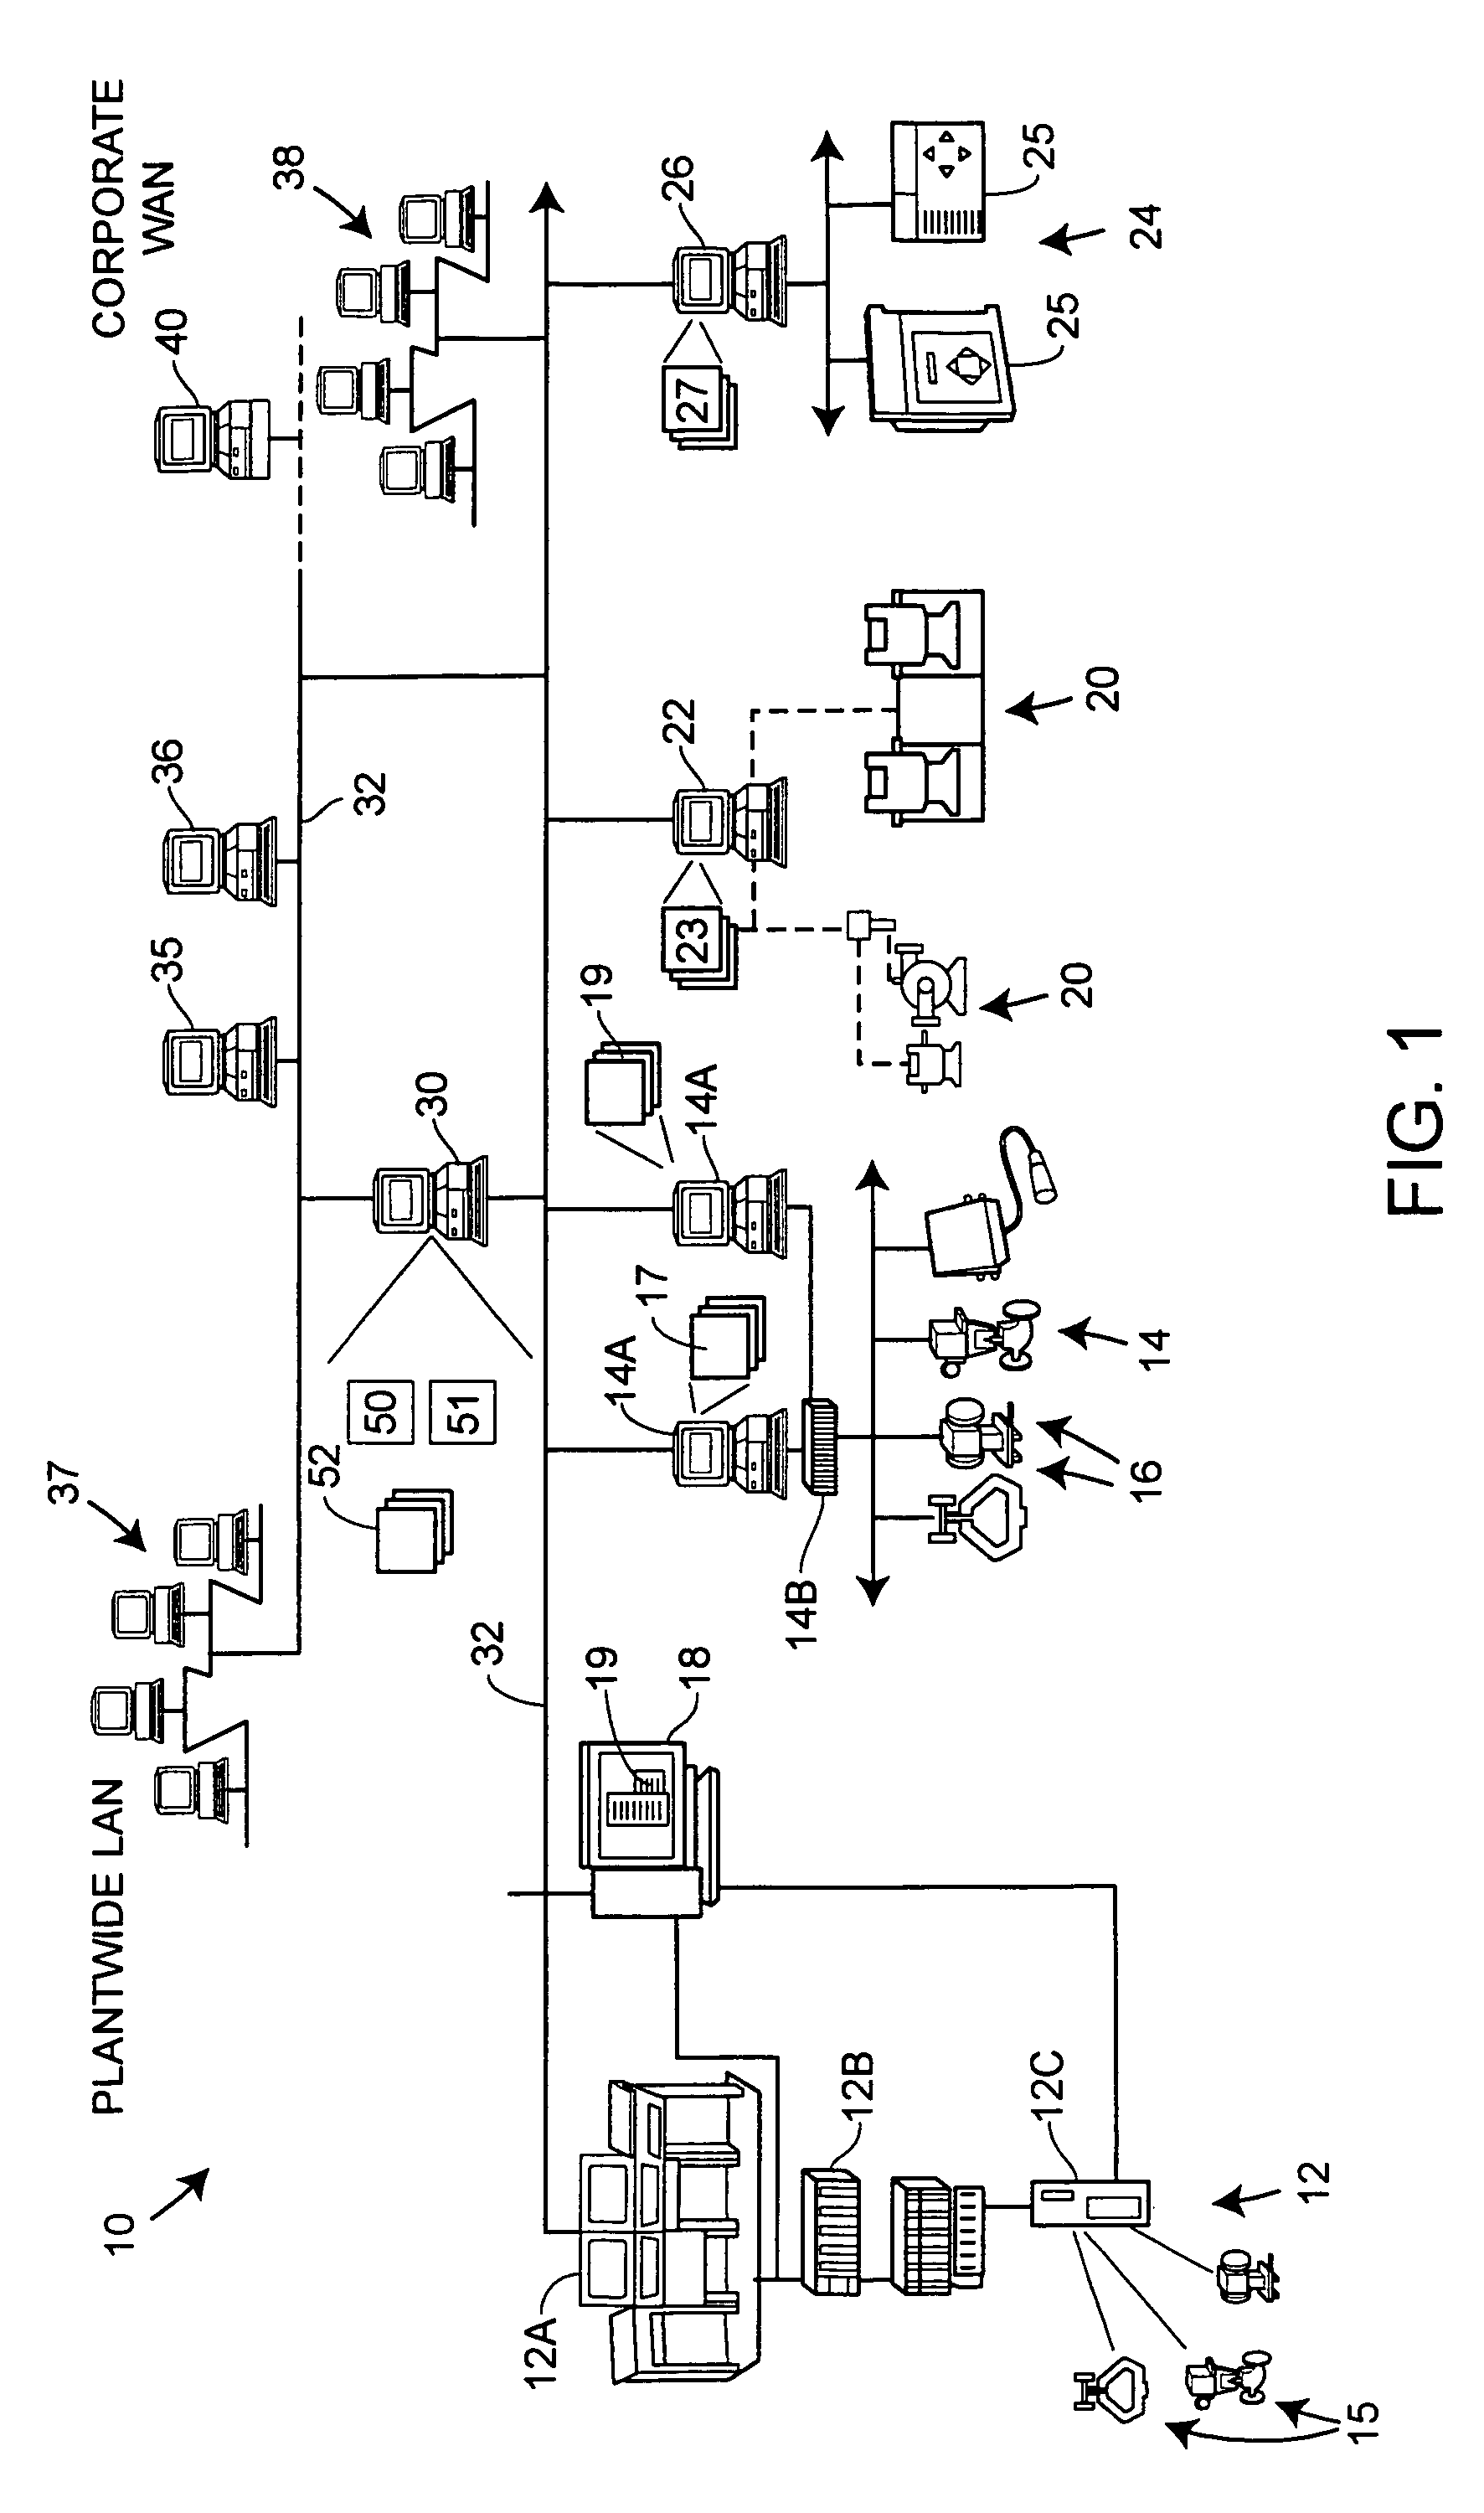 Data visualization within an integrated asset data system for a process plant